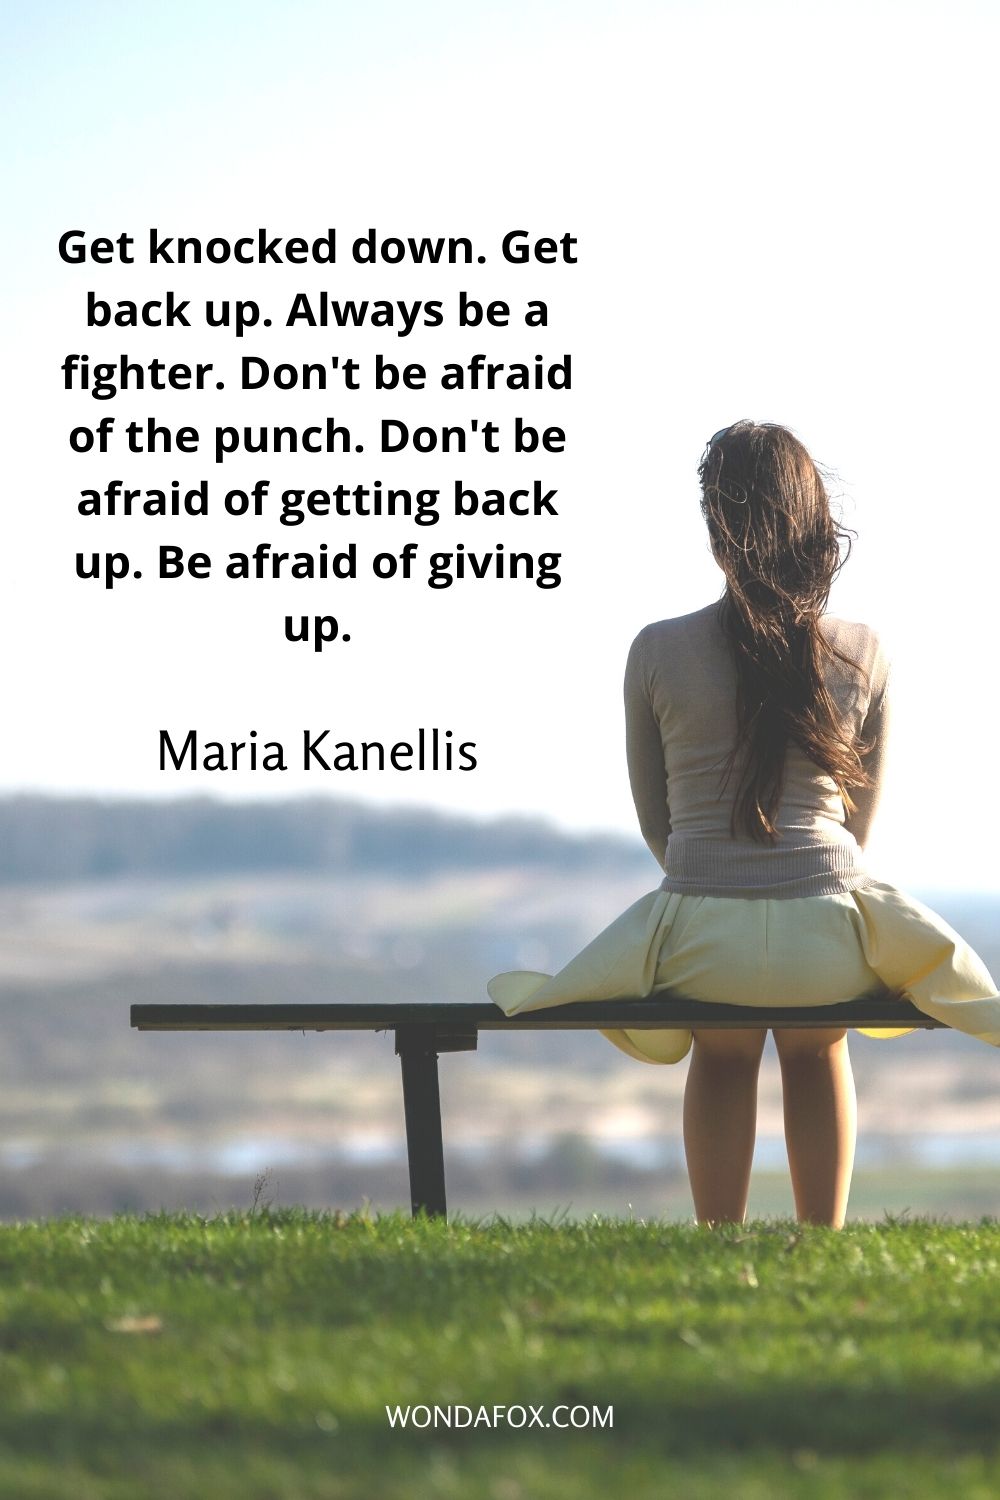 Get knocked down. Get back up. Always be a fighter. Don't be afraid of the punch. Don't be afraid of getting back up. Be afraid of giving up.